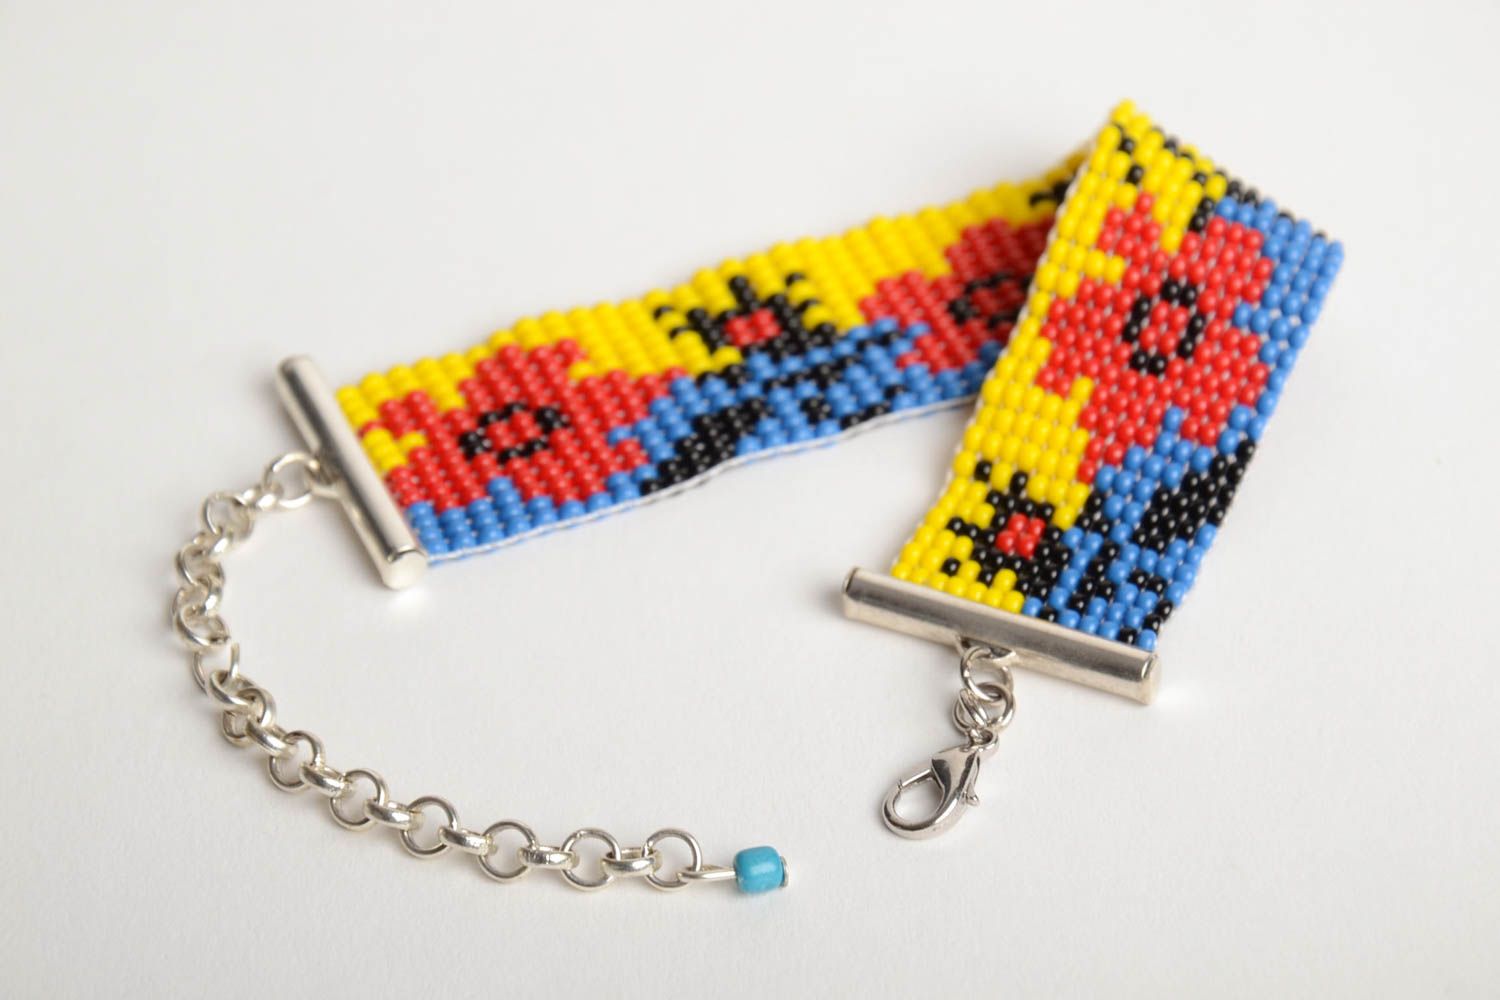 Handmade blue and yellow bead woven wrist bracelet with red poppy pattern